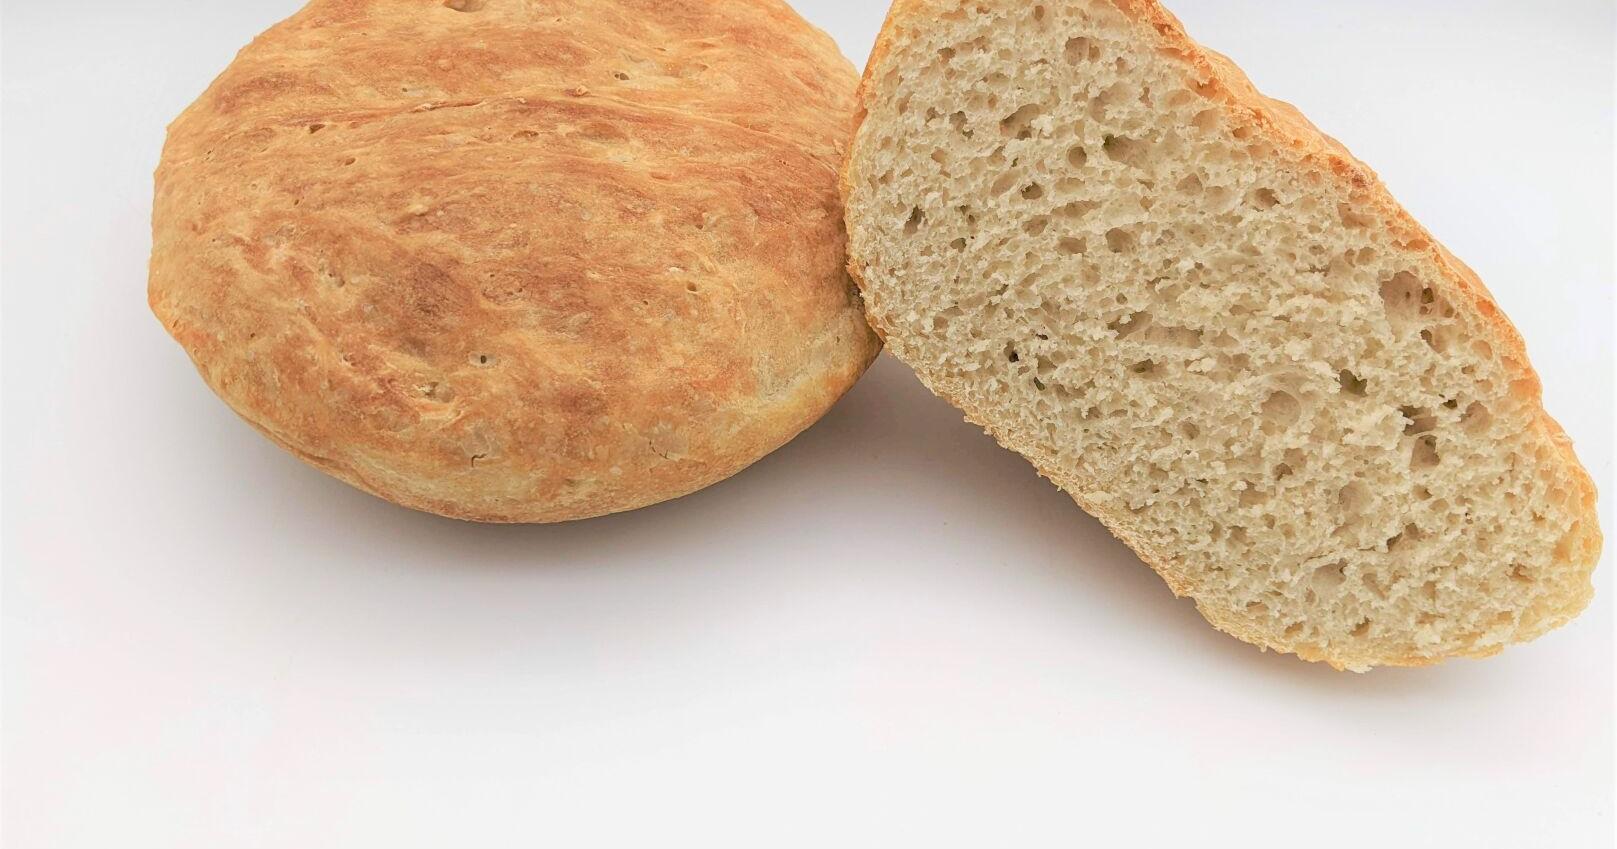 This no-knead peasant bread from TikTok only uses 5 ingredients